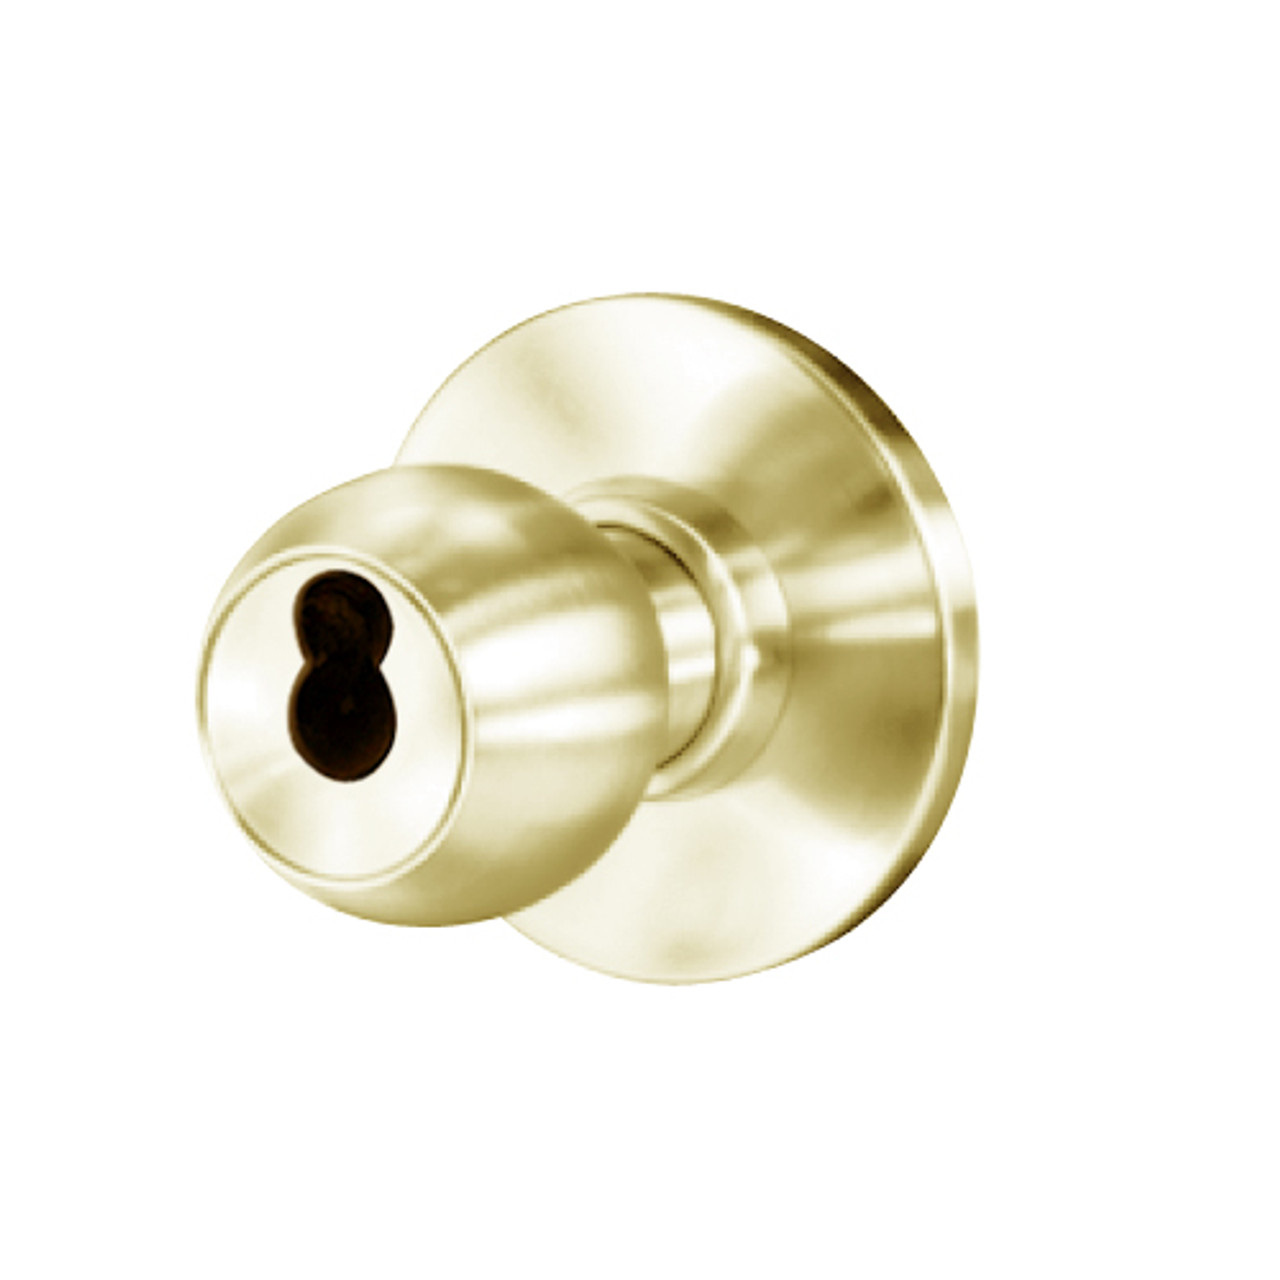 8K57YD4AS3606 Best 8K Series Exit Heavy Duty Cylindrical Knob Locks with Round Style in Satin Brass